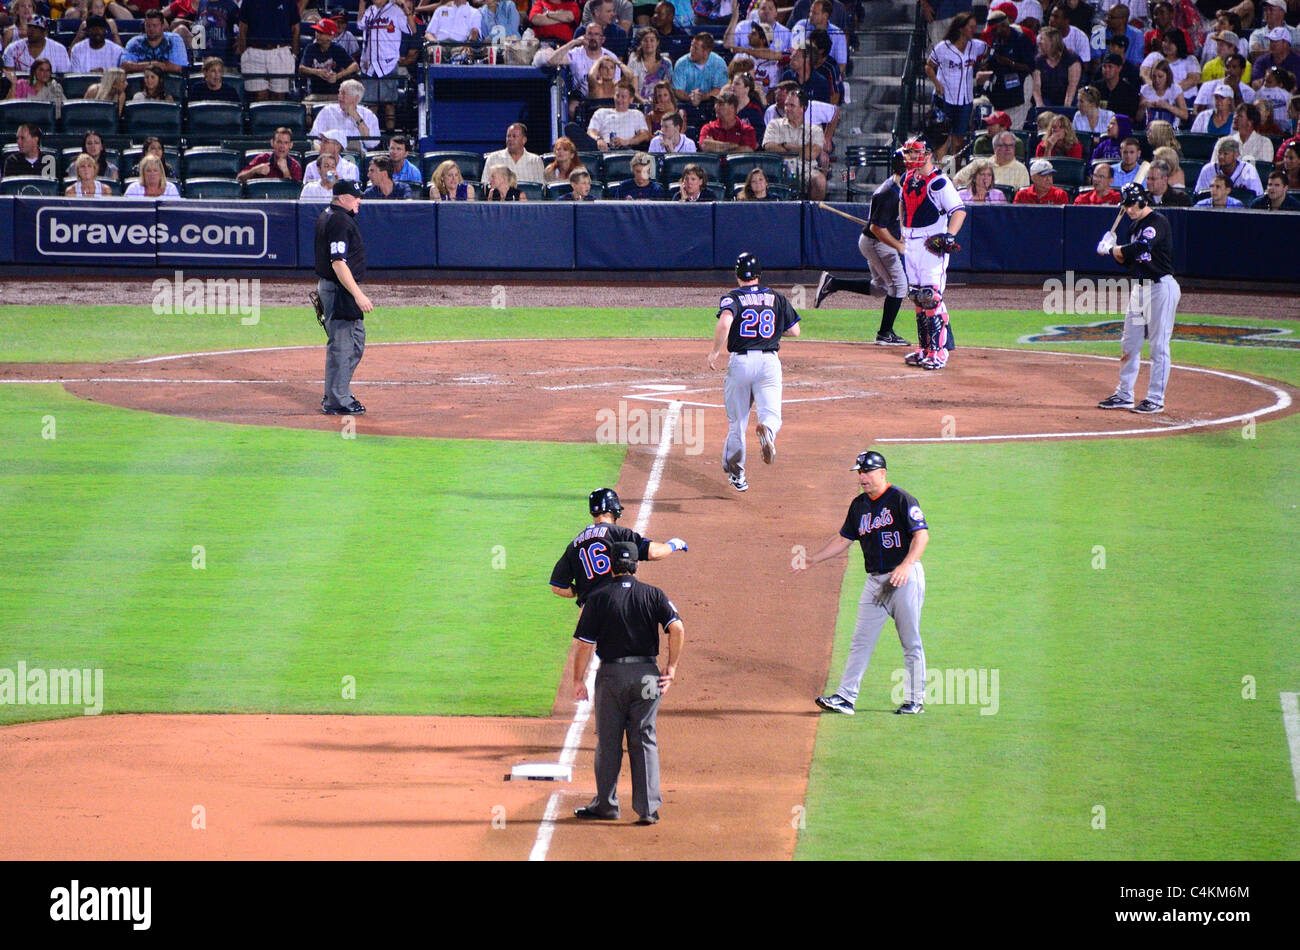 Mets round the bases after a homerun against the Braves at Turner Field in Atlanta, GA. Stock Photo